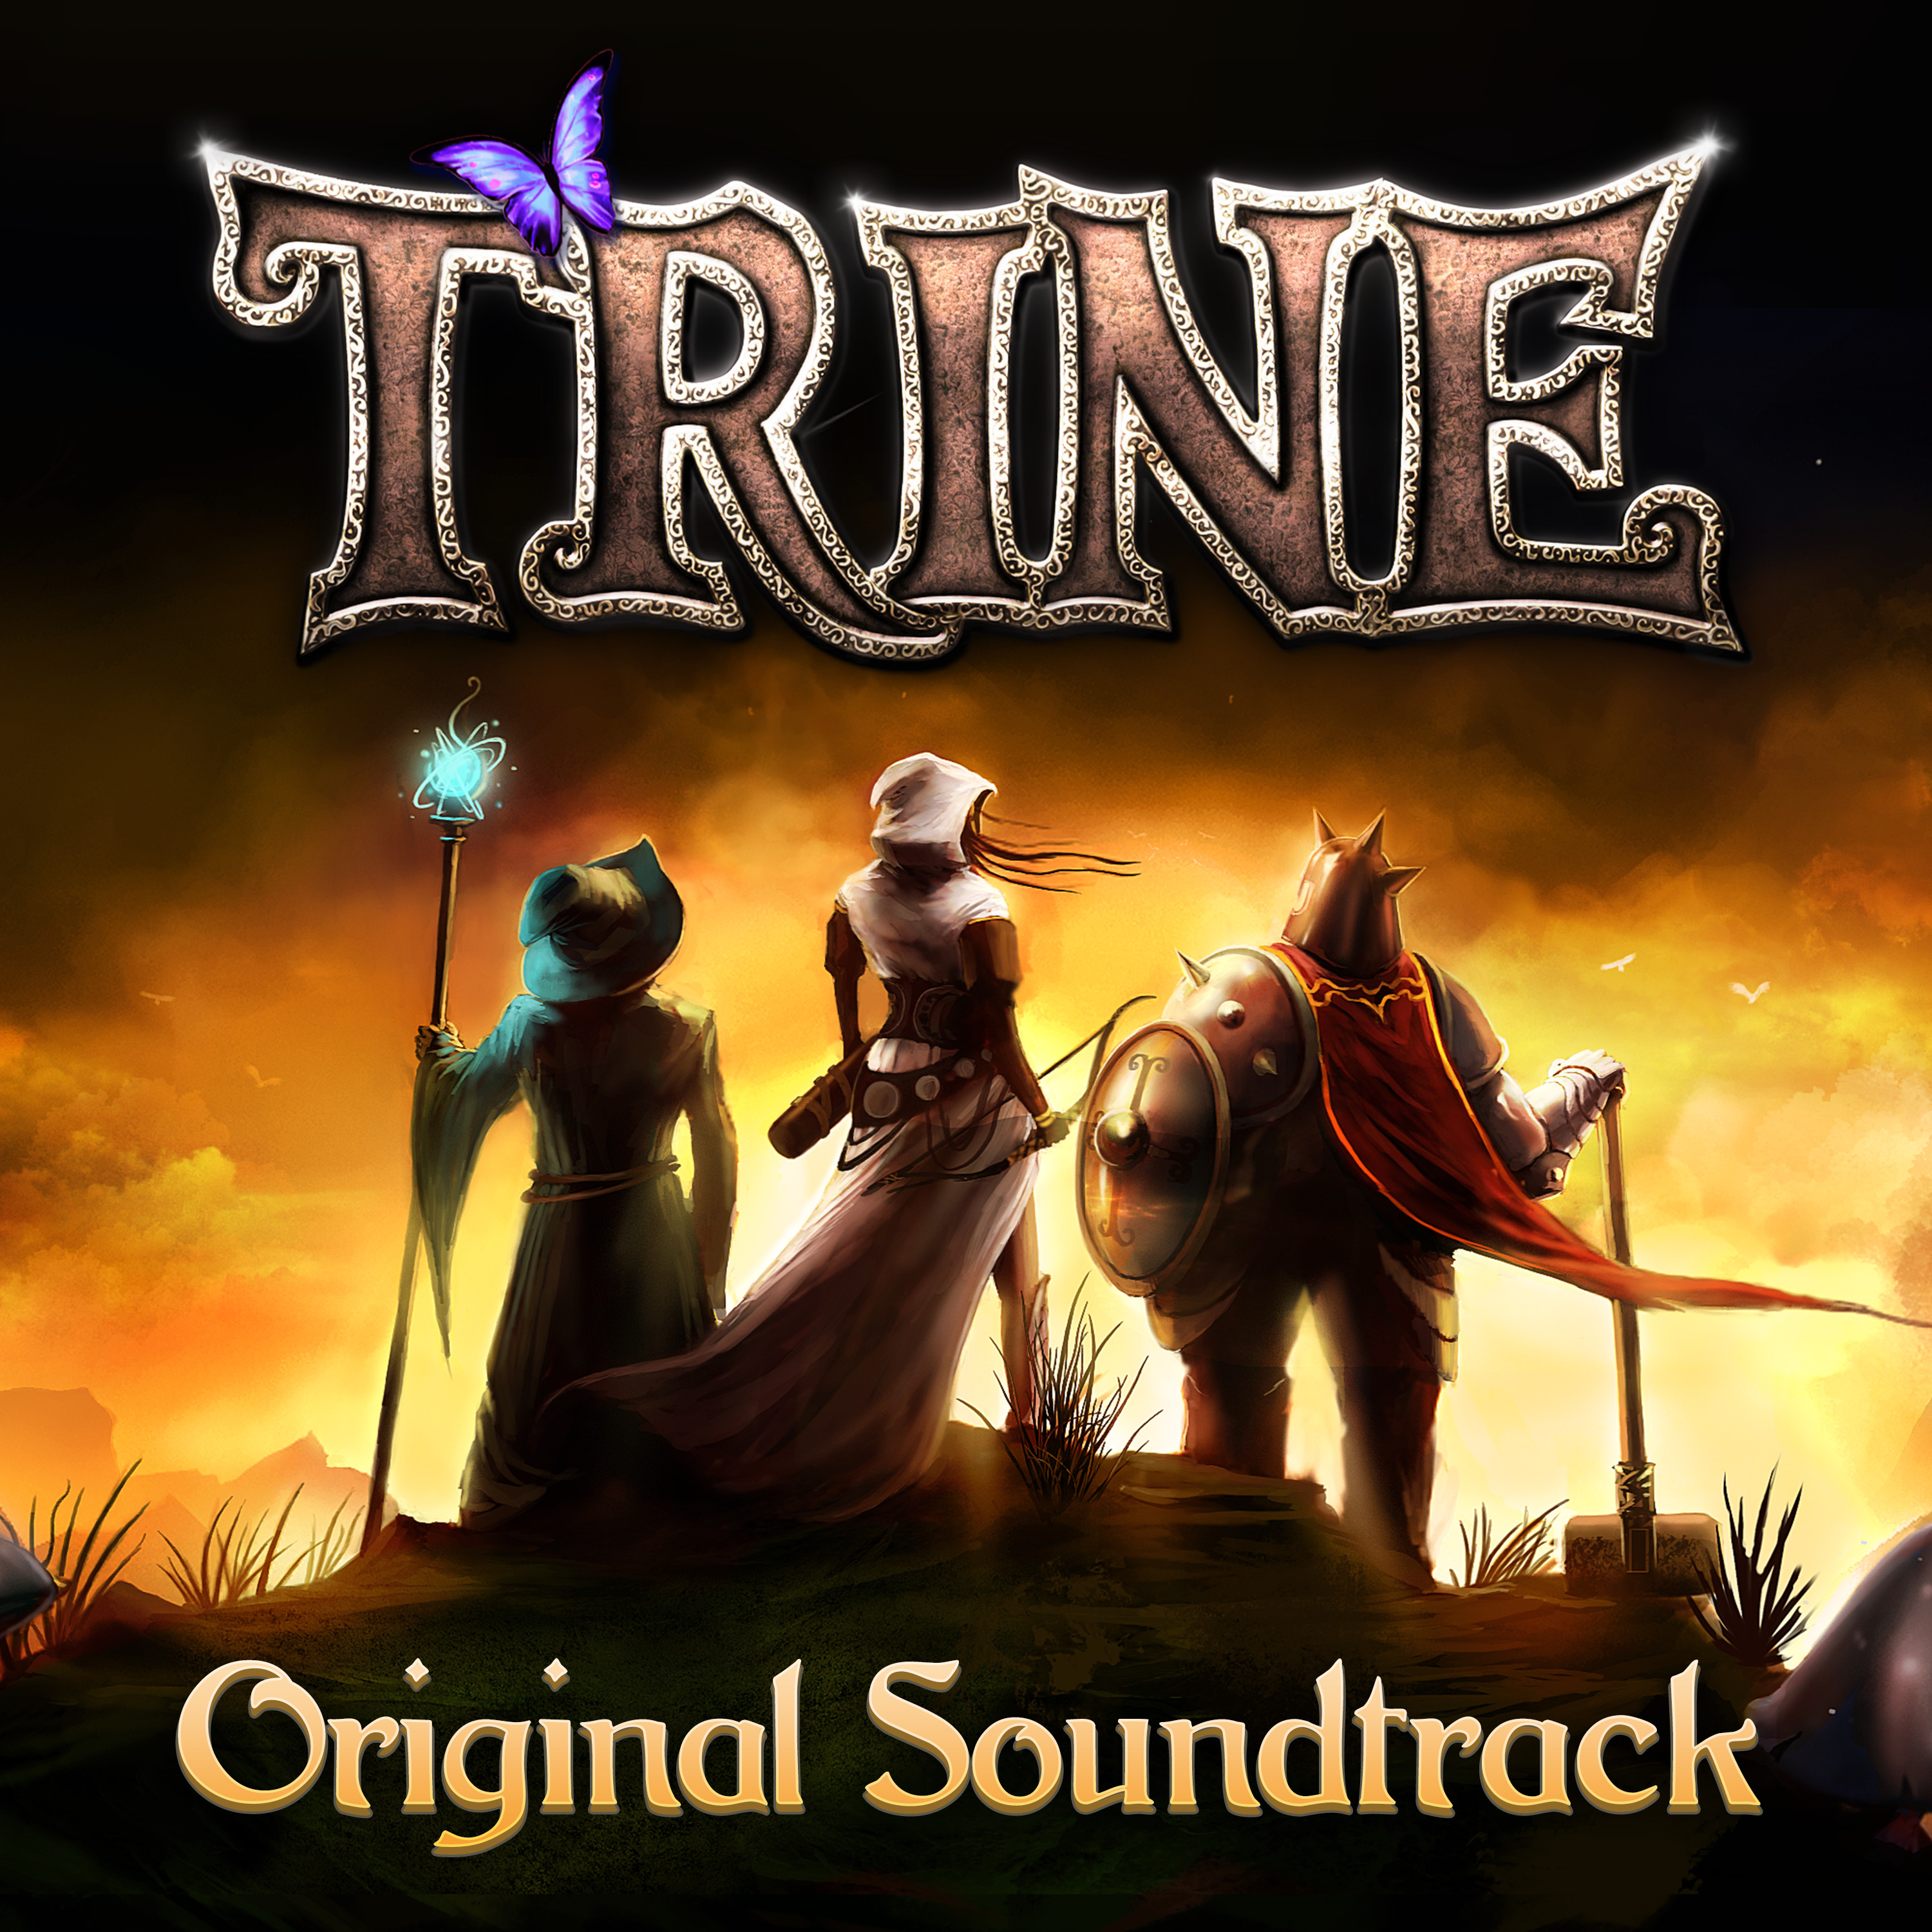 trine enchanted edition trophy guide and roadmap